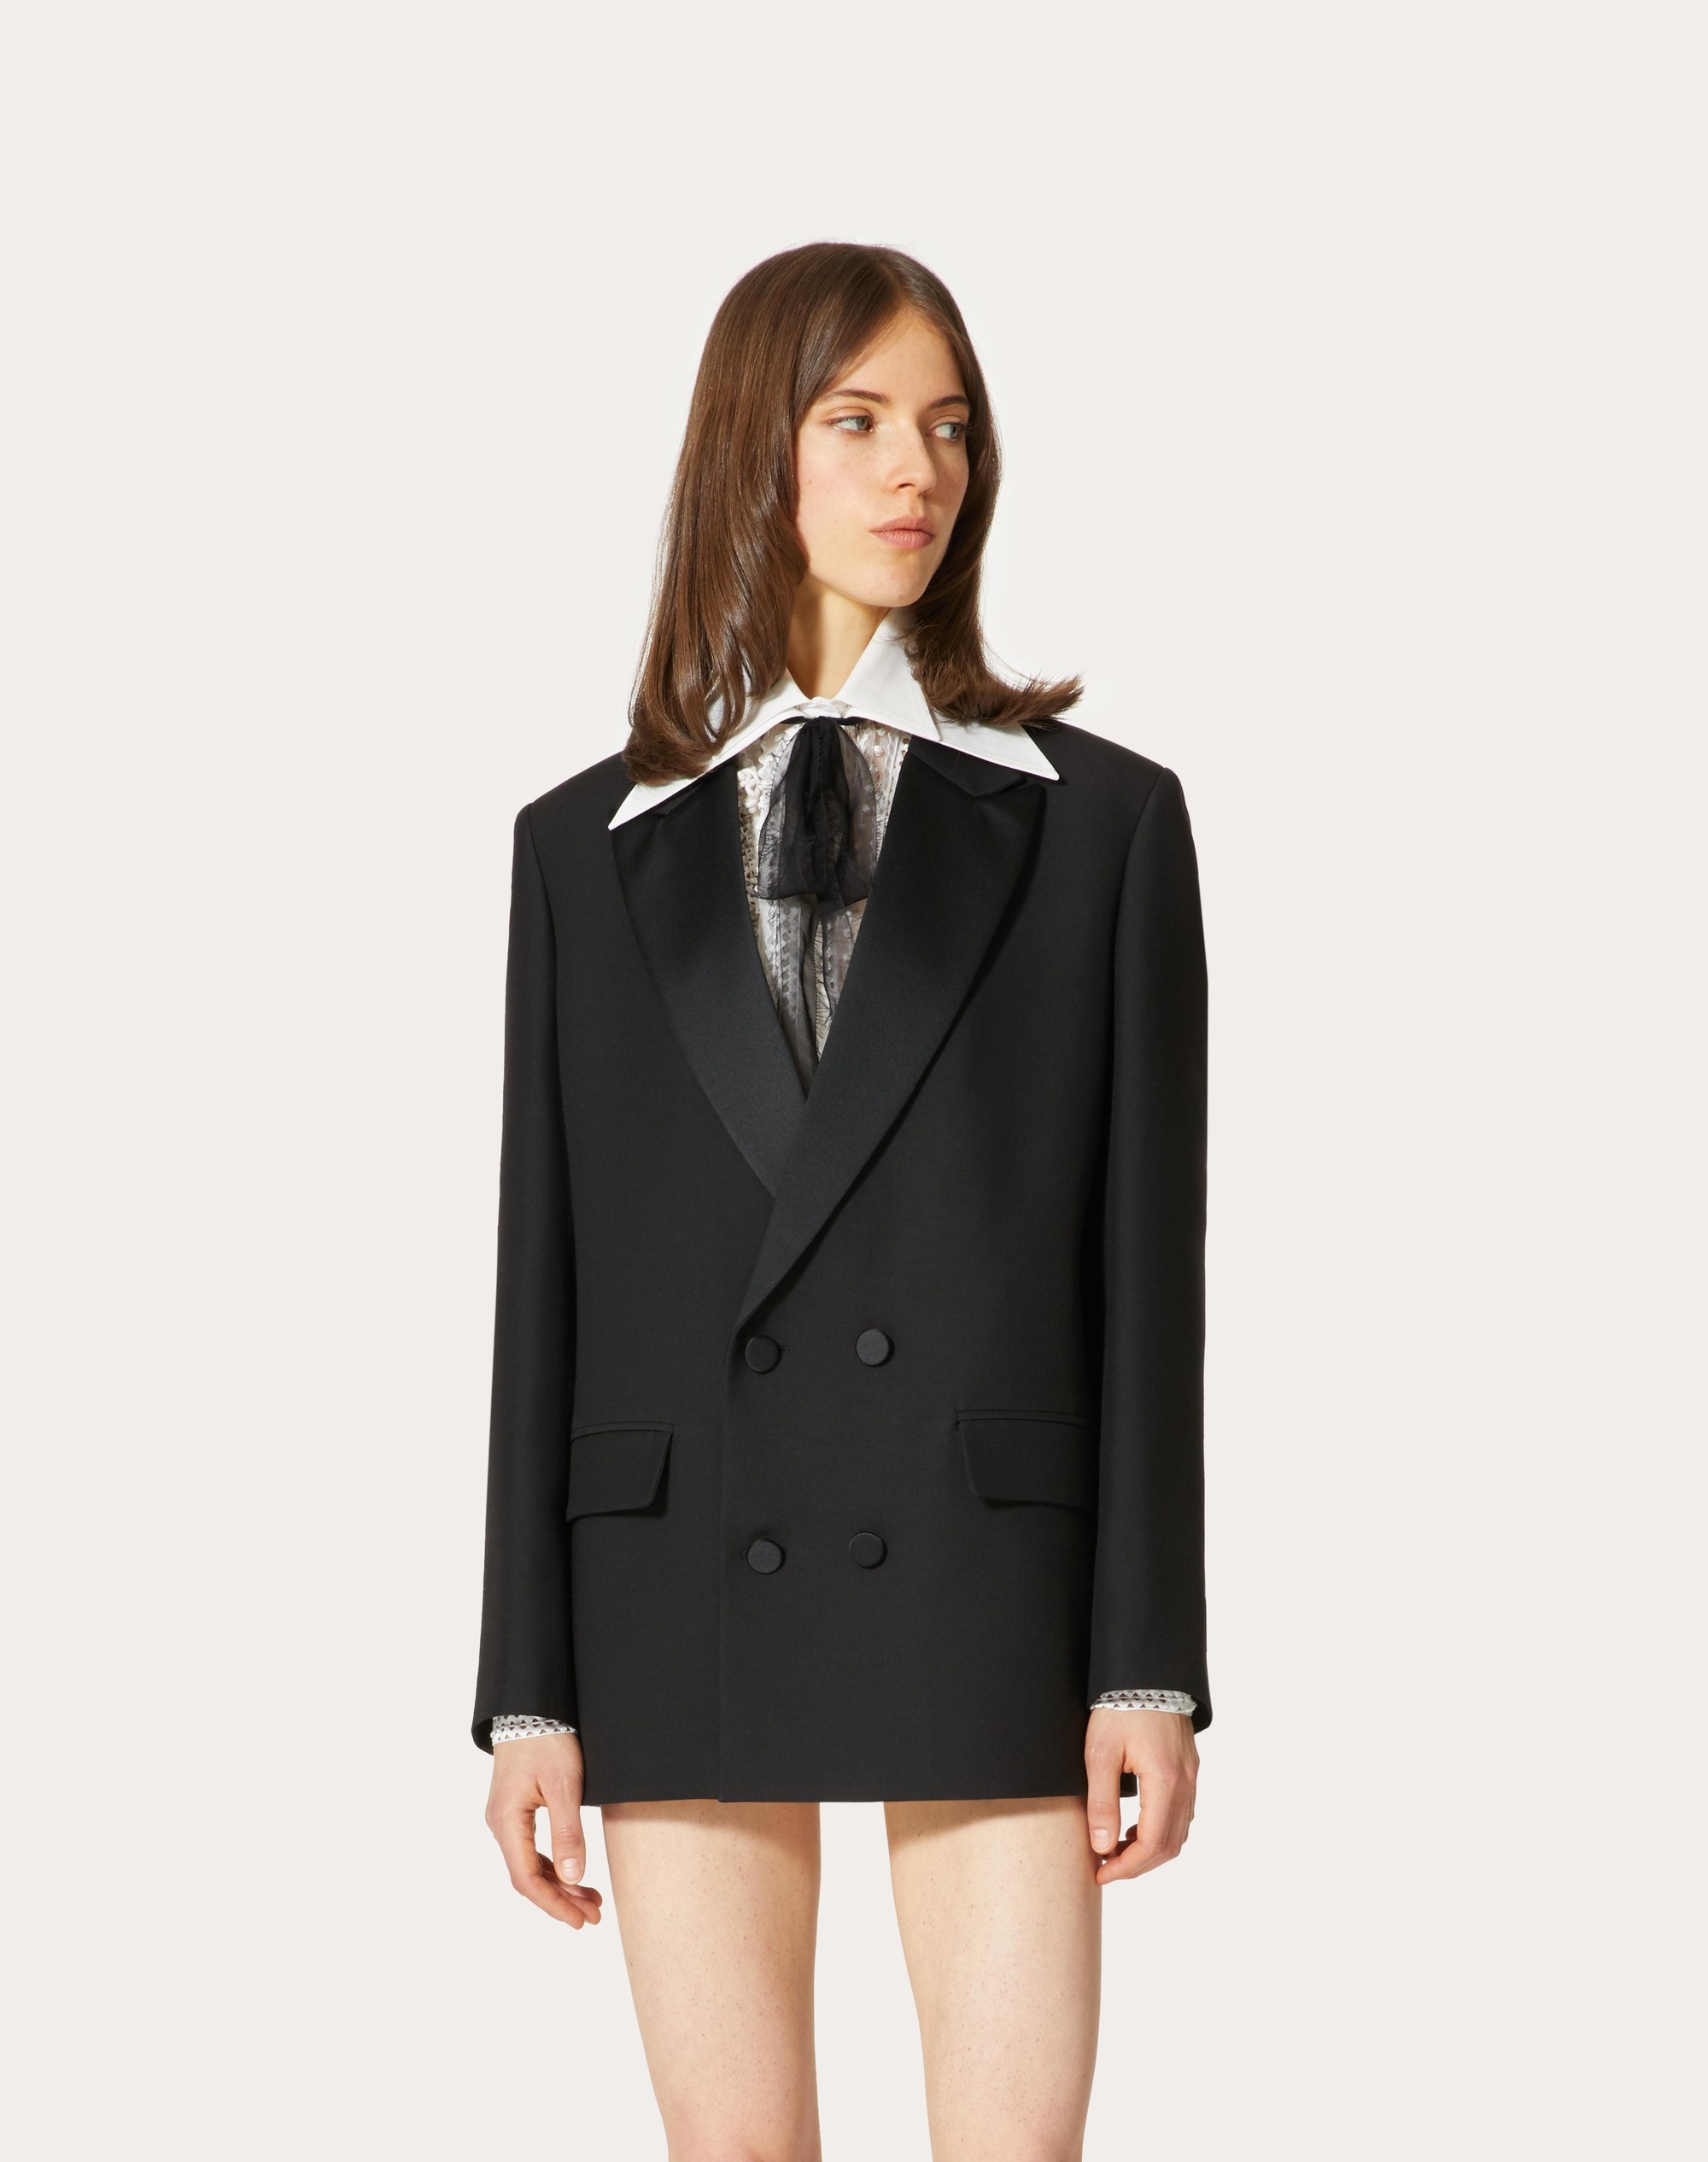 TUXEDO JACKET IN CREPE COUTURE - 3